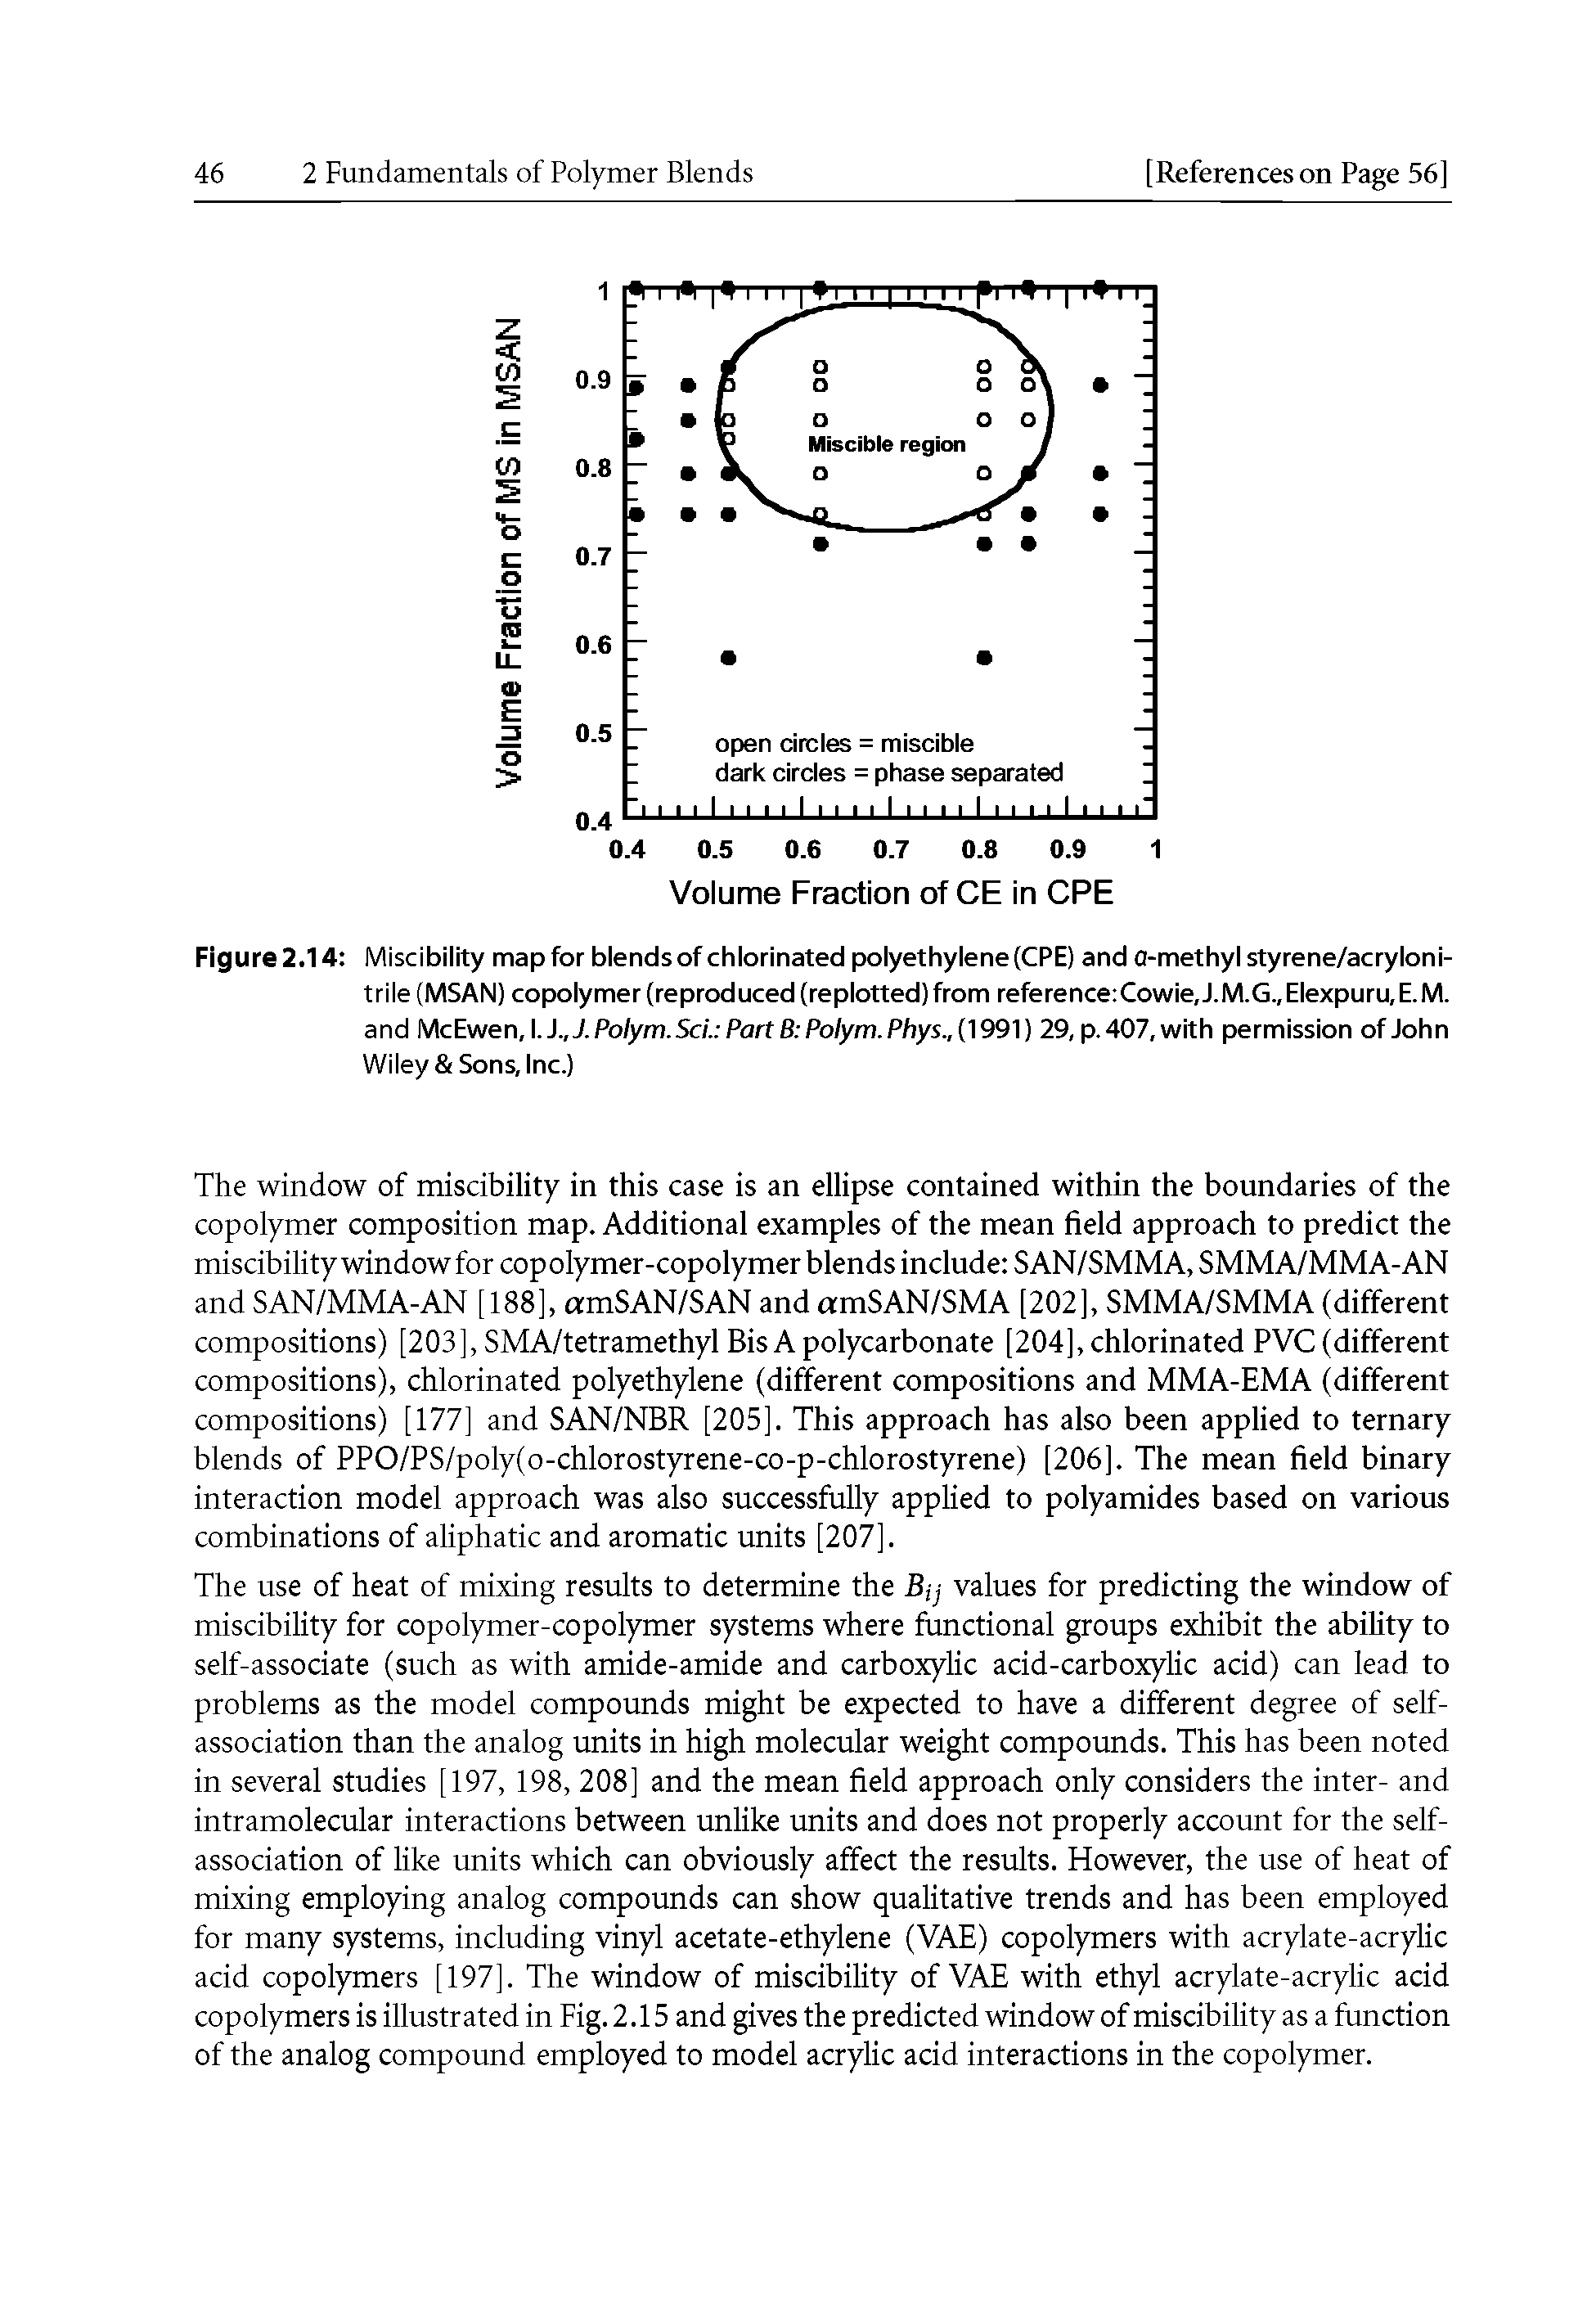 Figure 2.14 Miscibility map for blends of chlorinated polyethylene (CPE) and a-methyl styrene/acryloni-trile (MSAN) copolymer (reproduced (replotted) from reference Cowie,J.M.G.,Elexpuru,E.M. and McEwen,. y,J.Polym.Sci. Part B Polym.Phys.,( 99 ) 29, p. 407, with permission of John Wiley Sons, Inc.)...